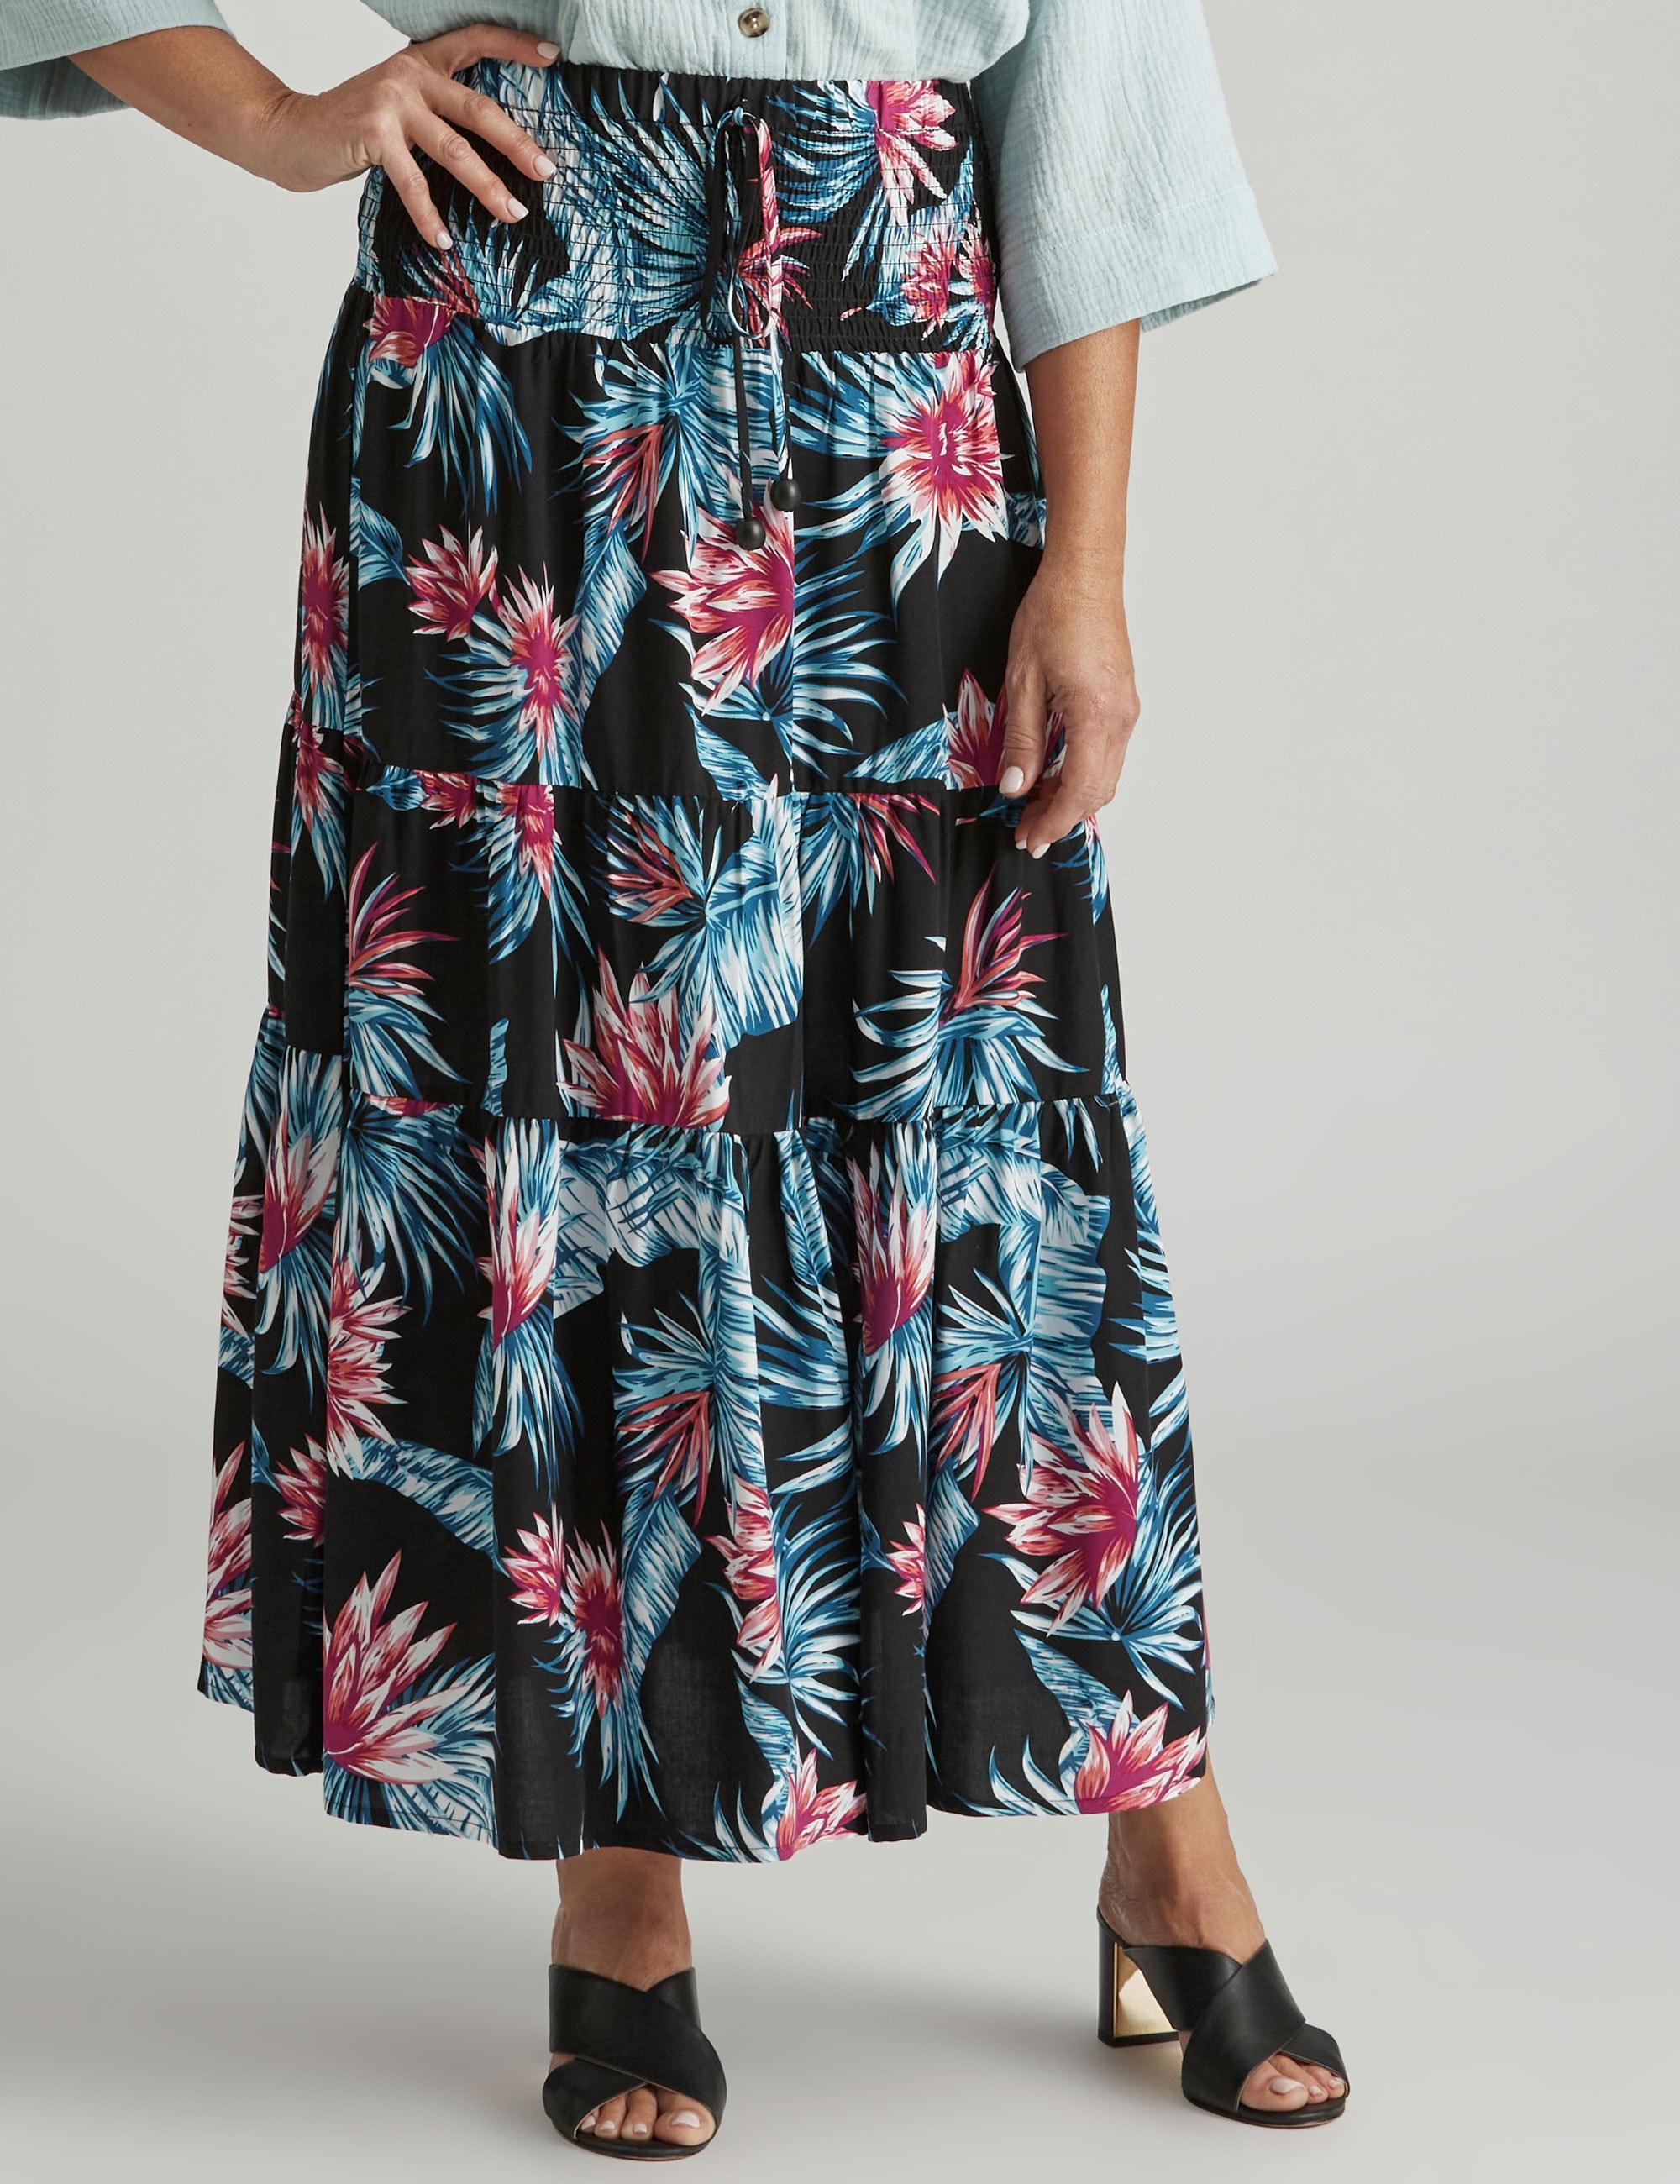 MILLERS - Womens Skirts - Maxi - Summer - Pink - Floral - A Line - Fashion - Tropical - Oversized - Tiered - Long - Casual Work Clothes - Office Wear